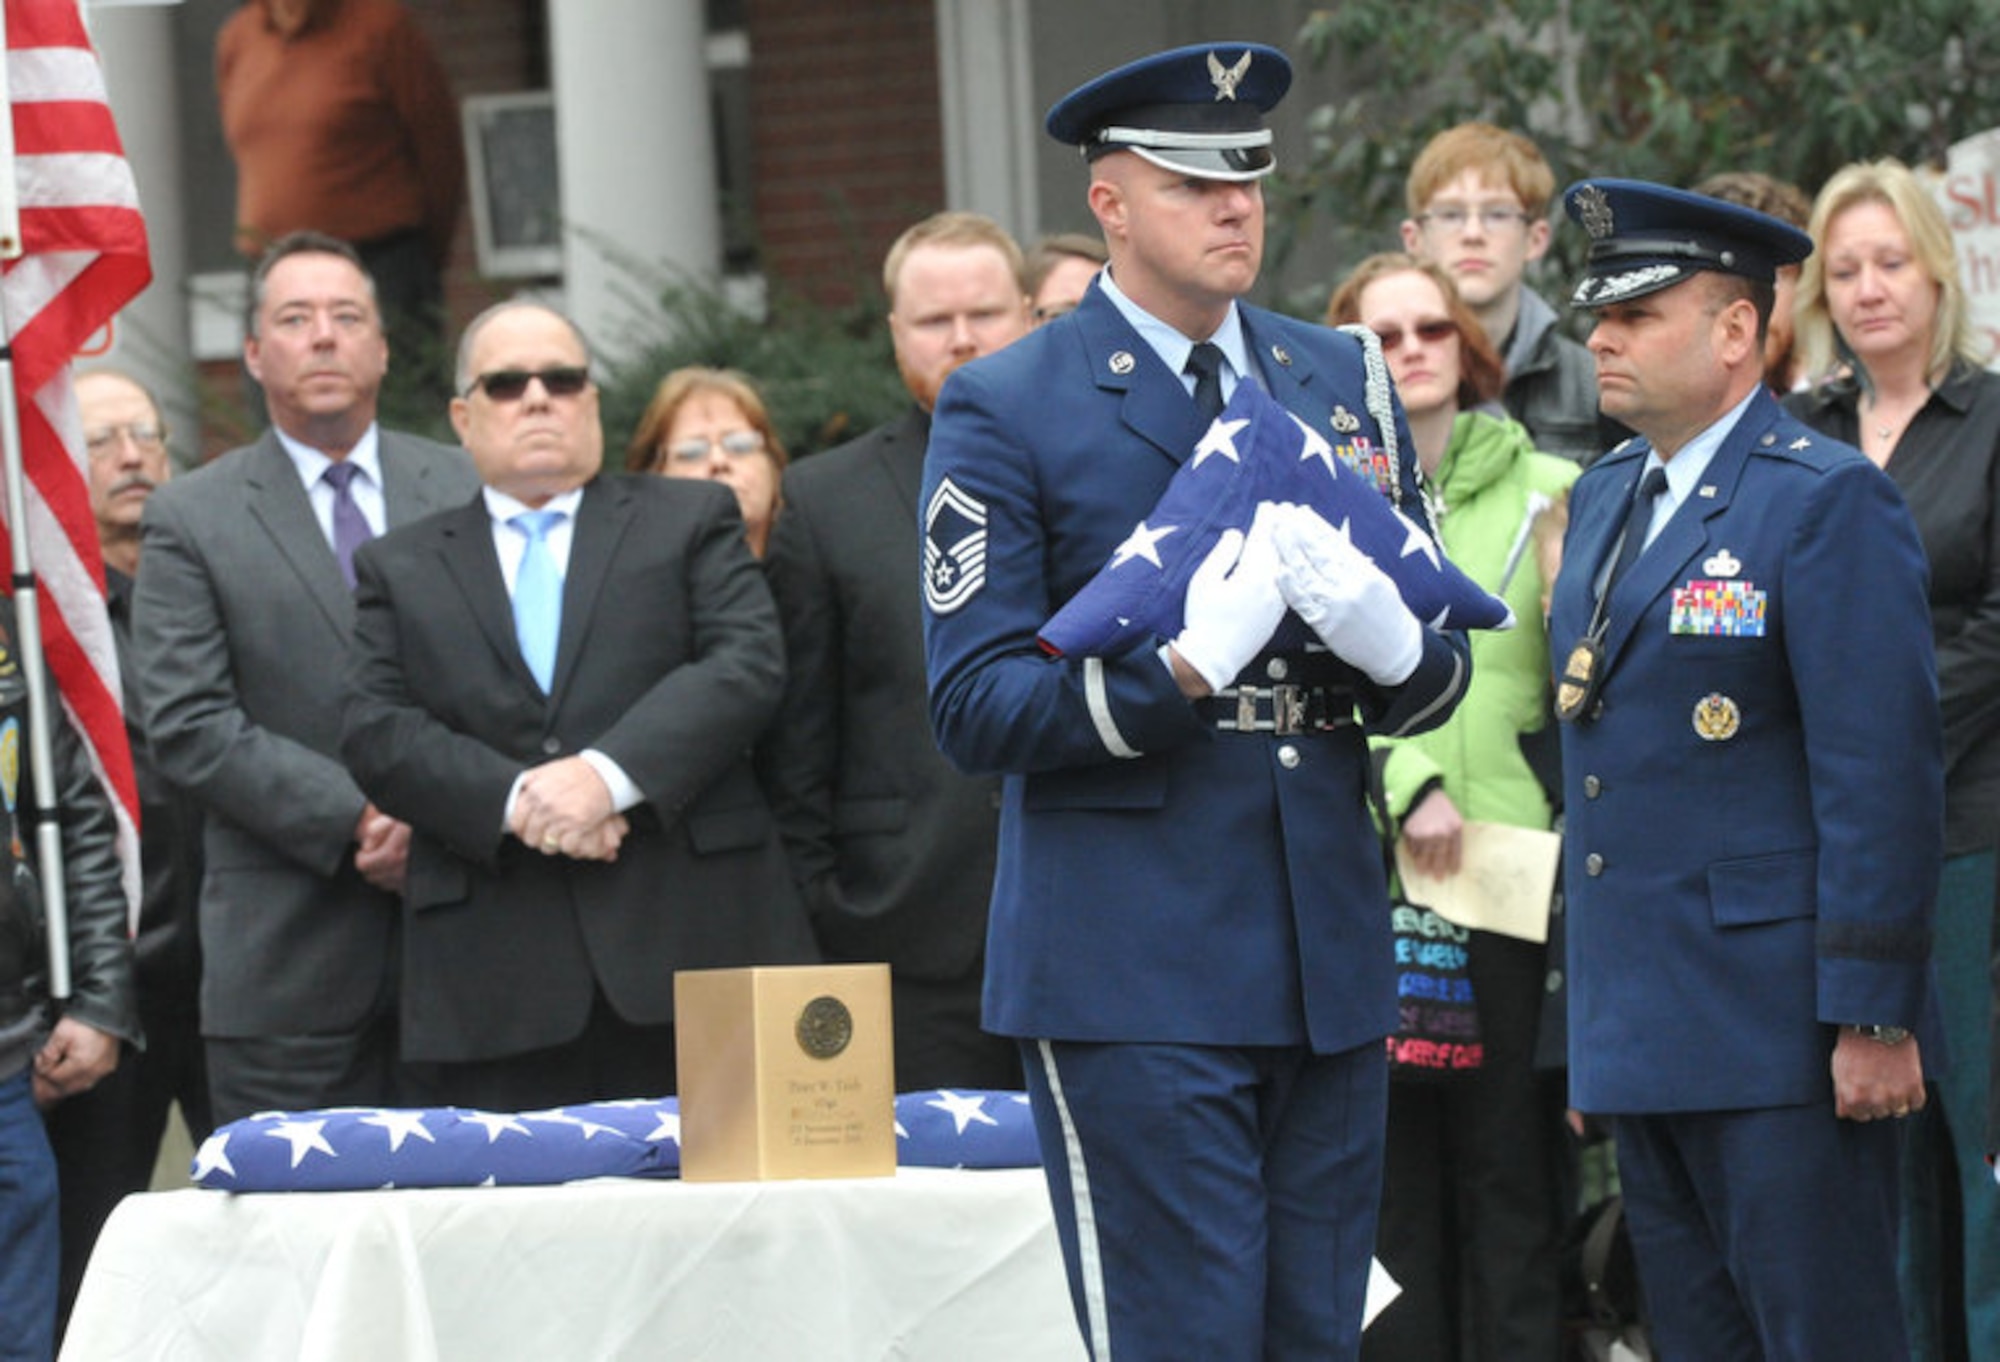 Funeral services were held Jan. 8 in Easton, Pa., for Air Force Staff Sgt. and Office of Special Investigations Special Agent Peter W. Taub, who was among six Airmen killed in a suicide bombing attack Dec. 21 near Bagram Air Base, Afghanistan. (Photo courtesy Lehighvalleylive.com) 